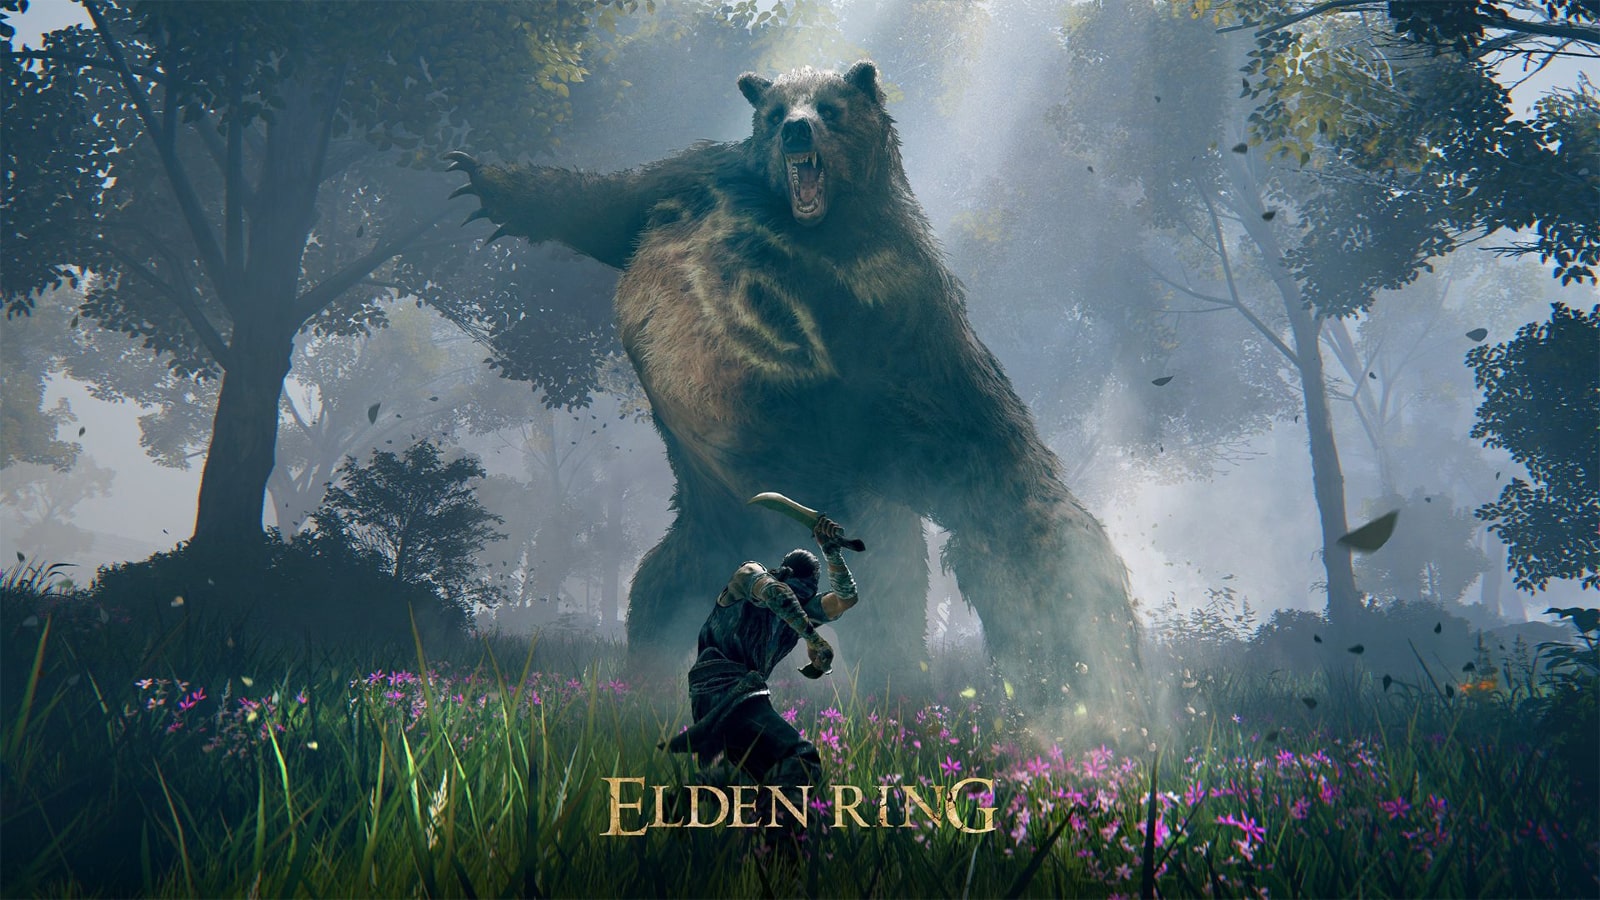 Elden Ring Easy Mode Is One Of The Most Popular PC Mods ATM